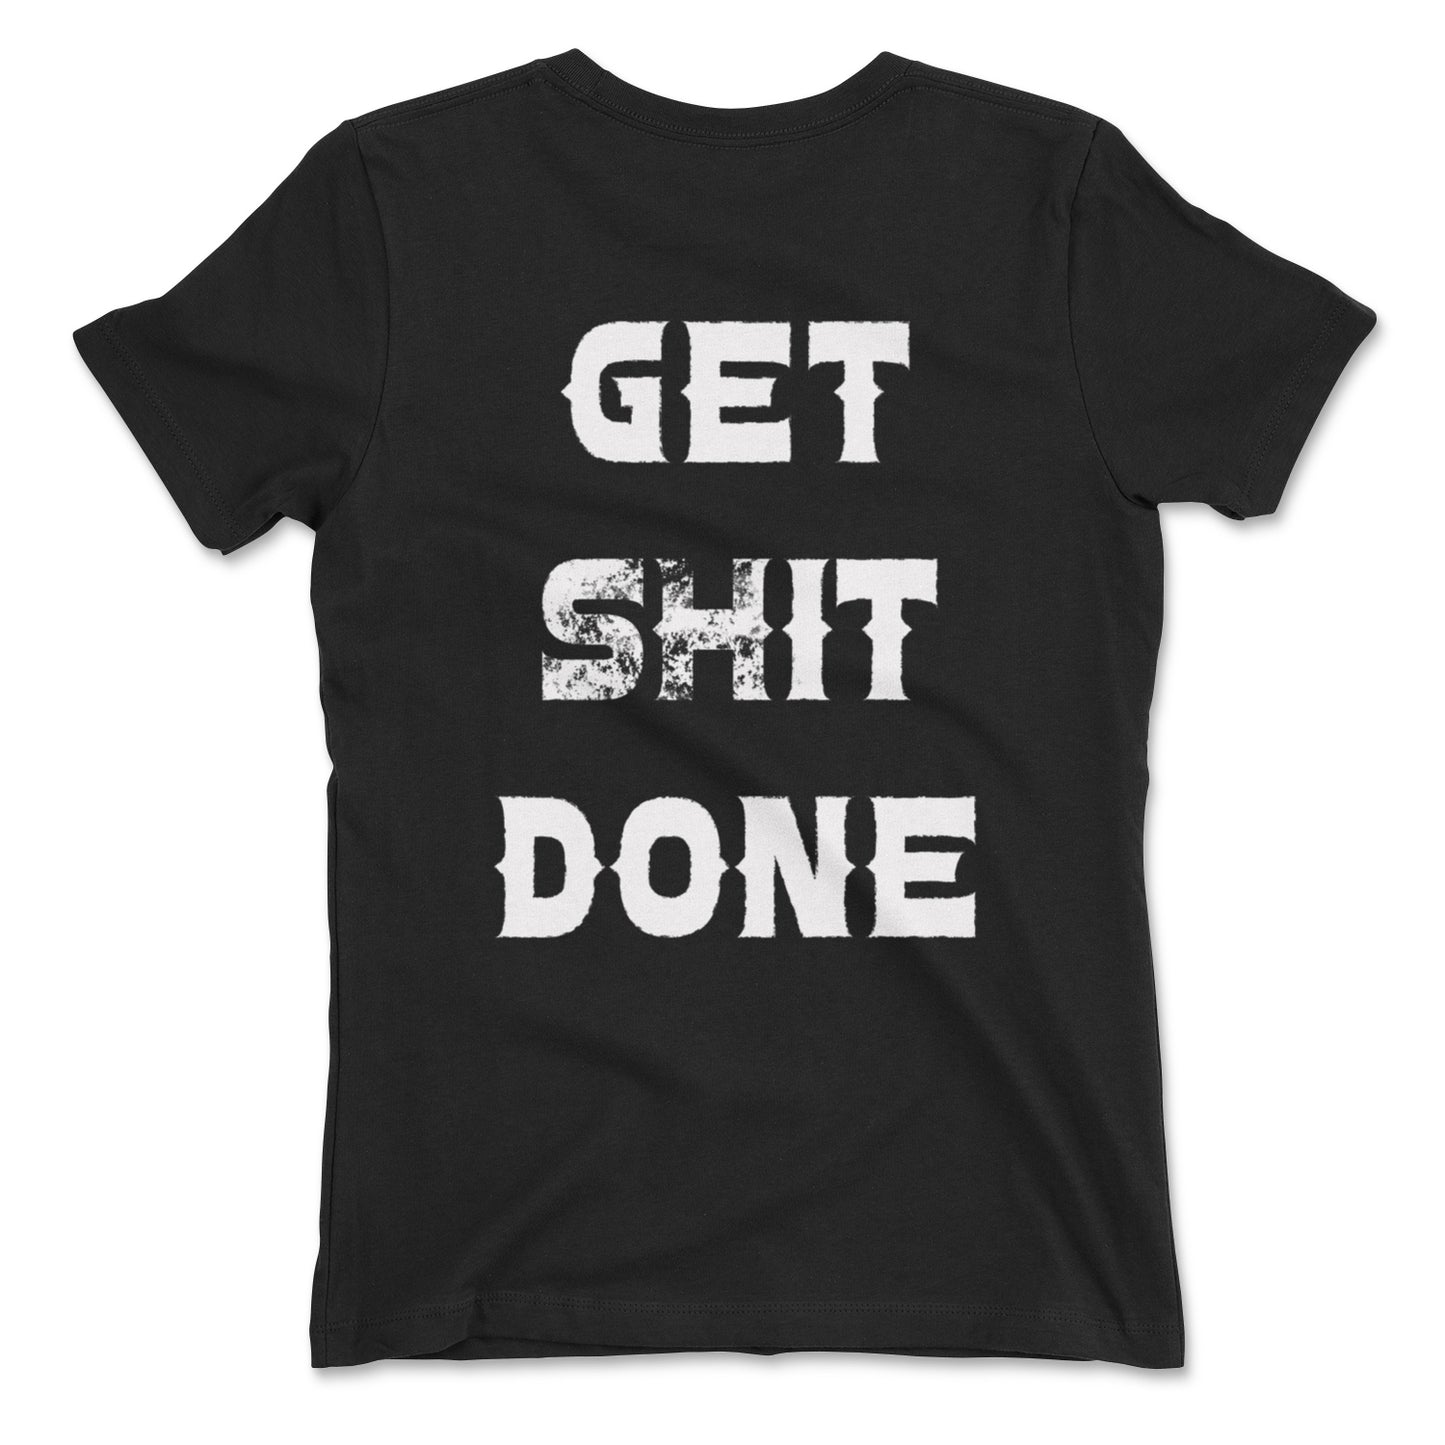 GET IT DONE Tee (FITTED)